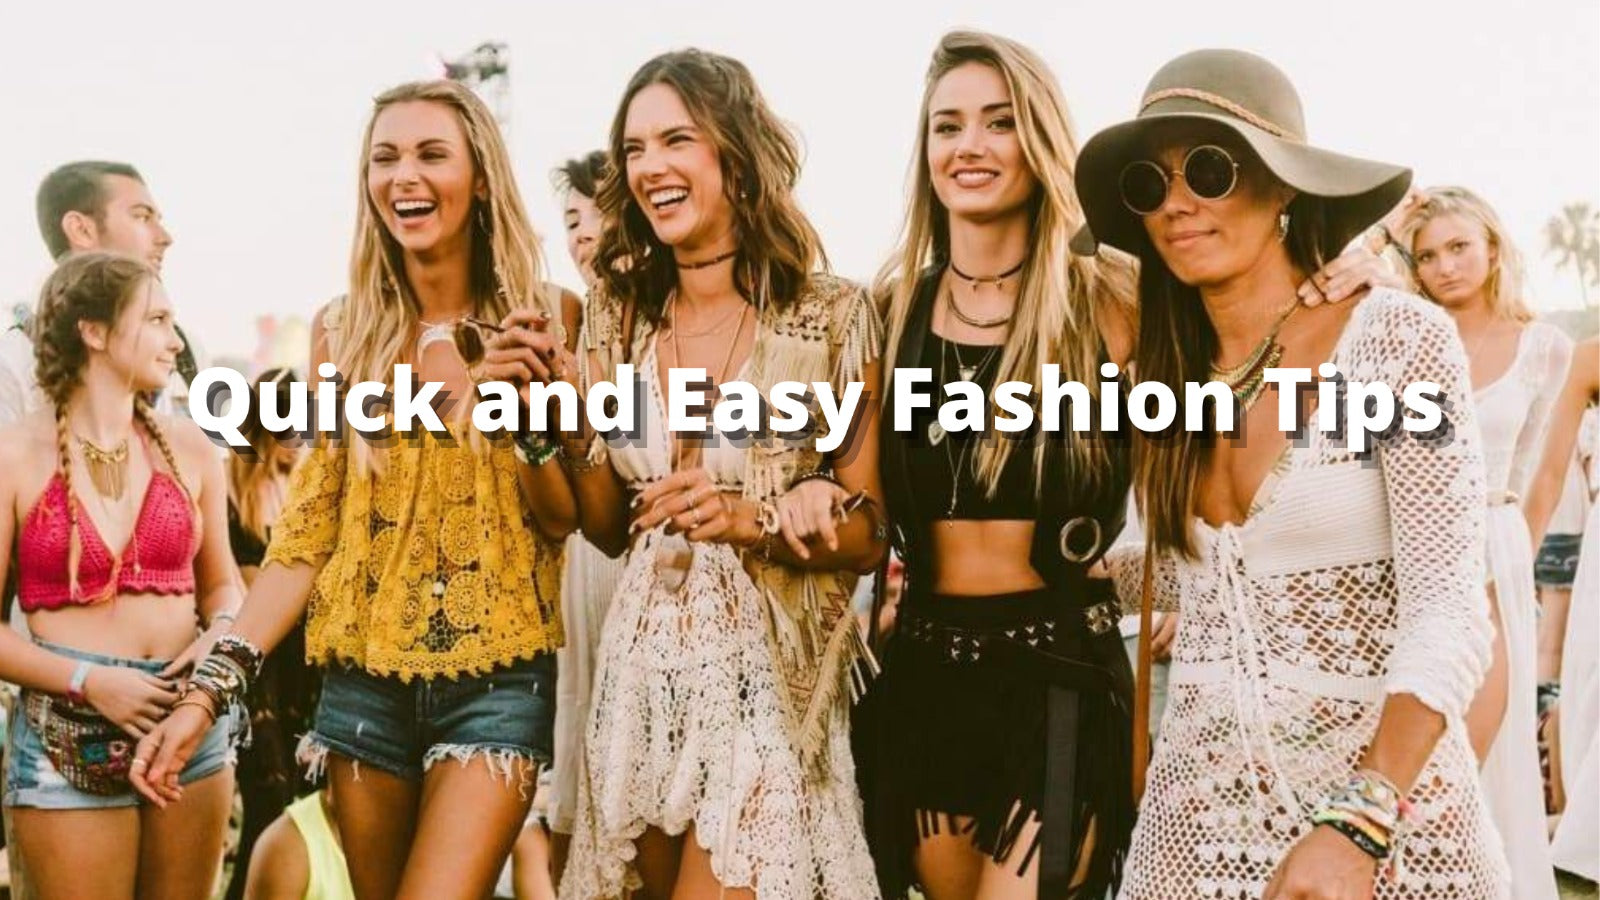 Quick and Easy Fashion Tips